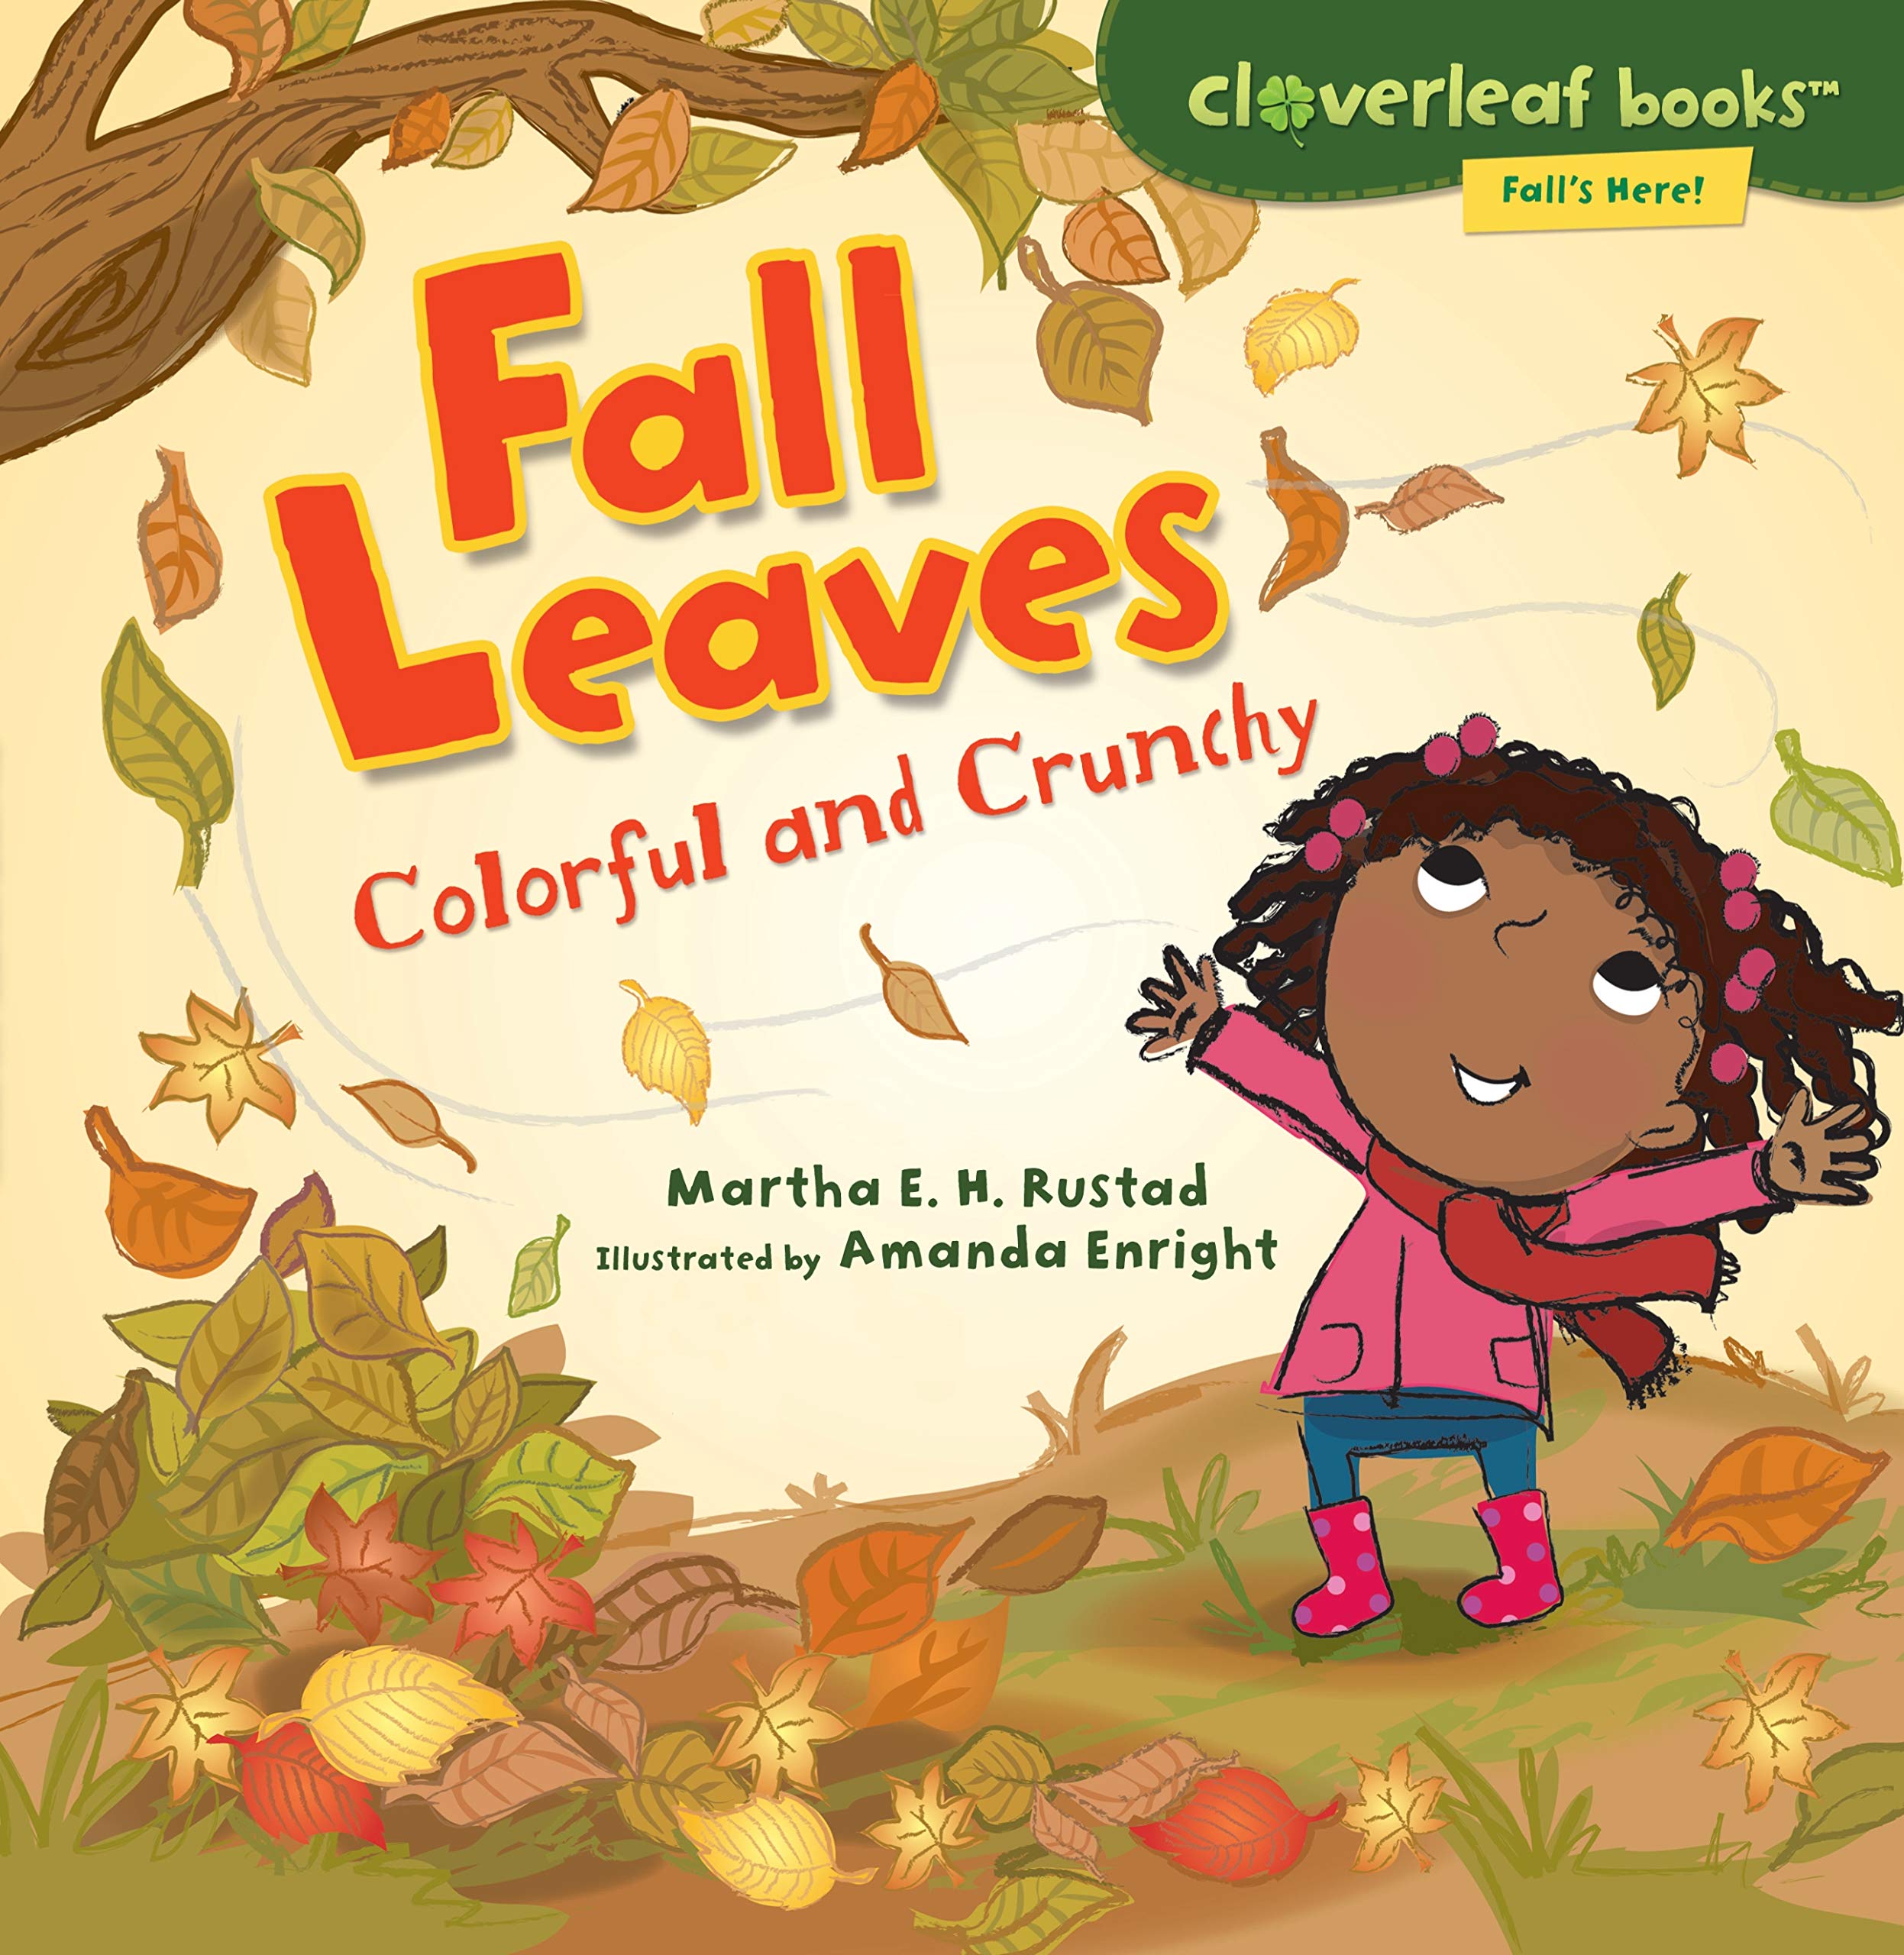 speech and language teaching concepts for Fall Leaves: Colorful and Crunchy in speech therapy​ ​